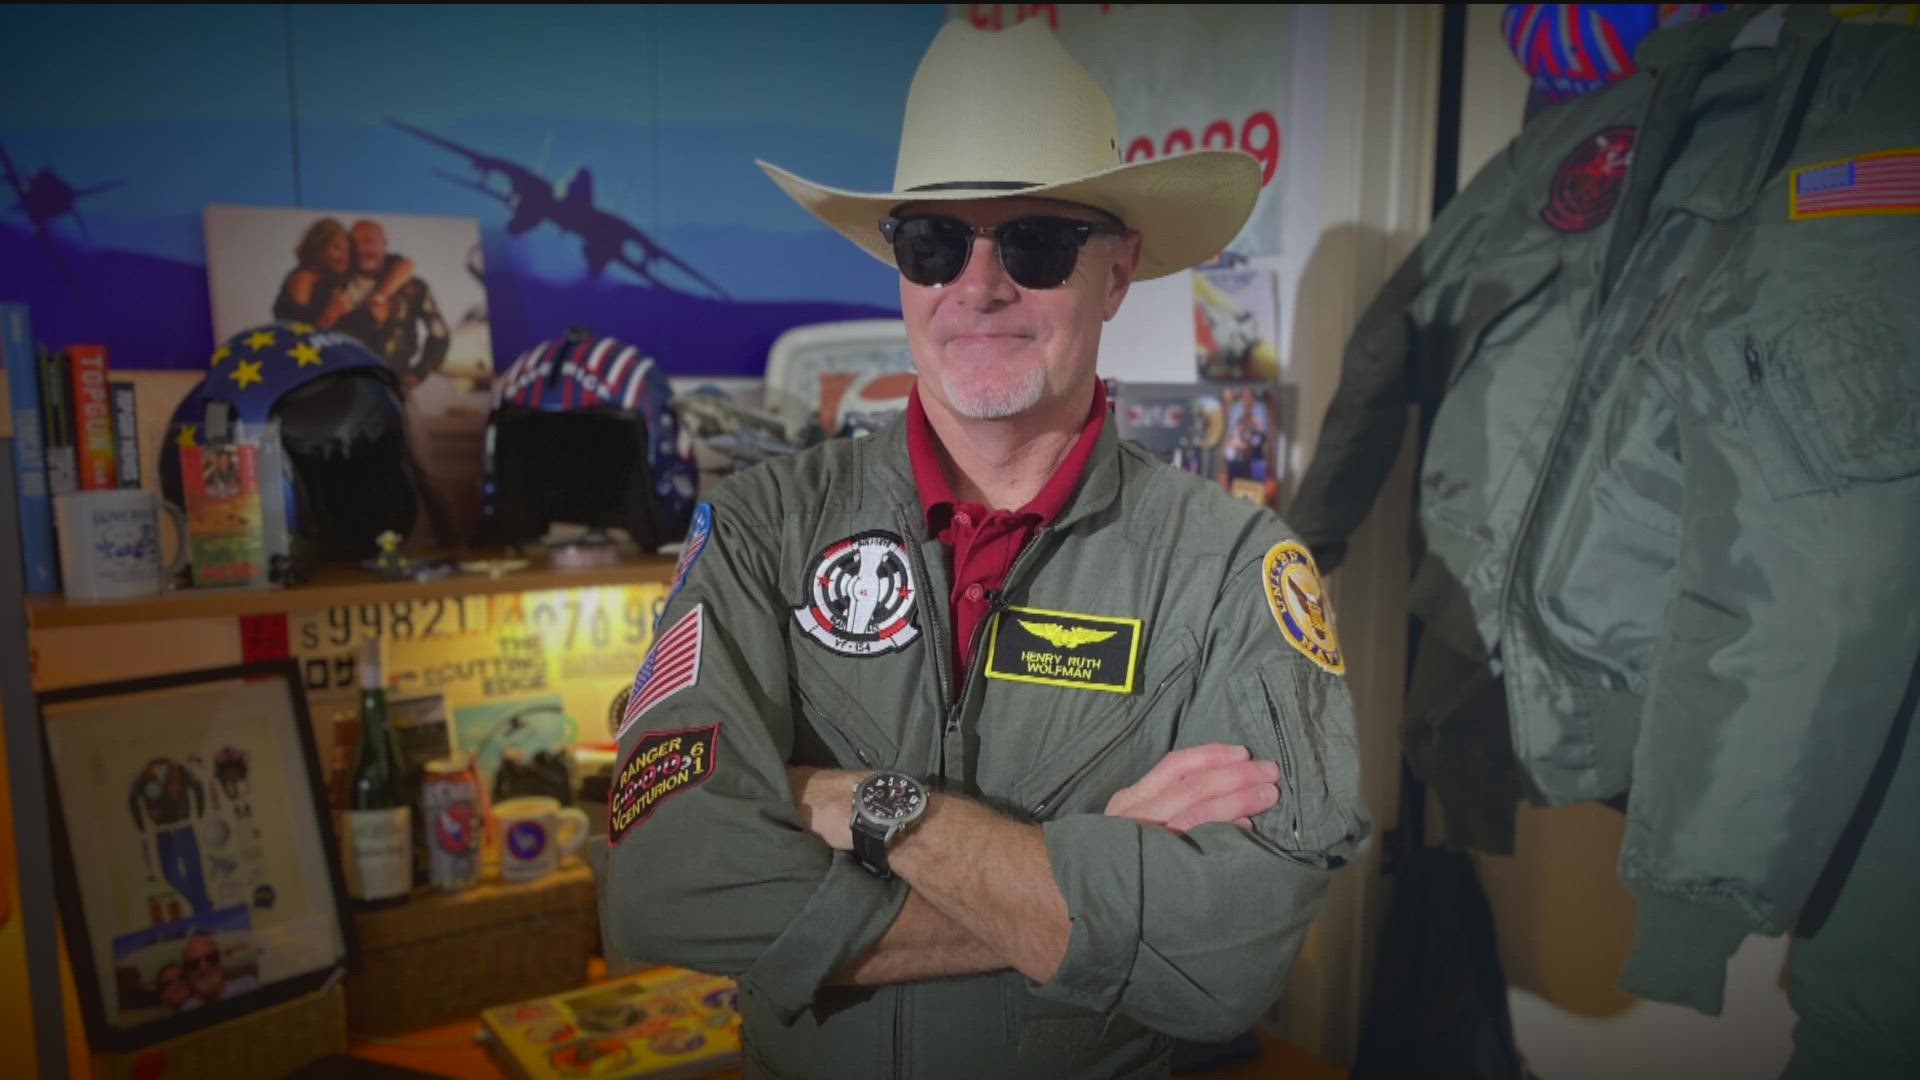 John Merritt is a retail manager by day but Top Gun fanatic by night, every night.